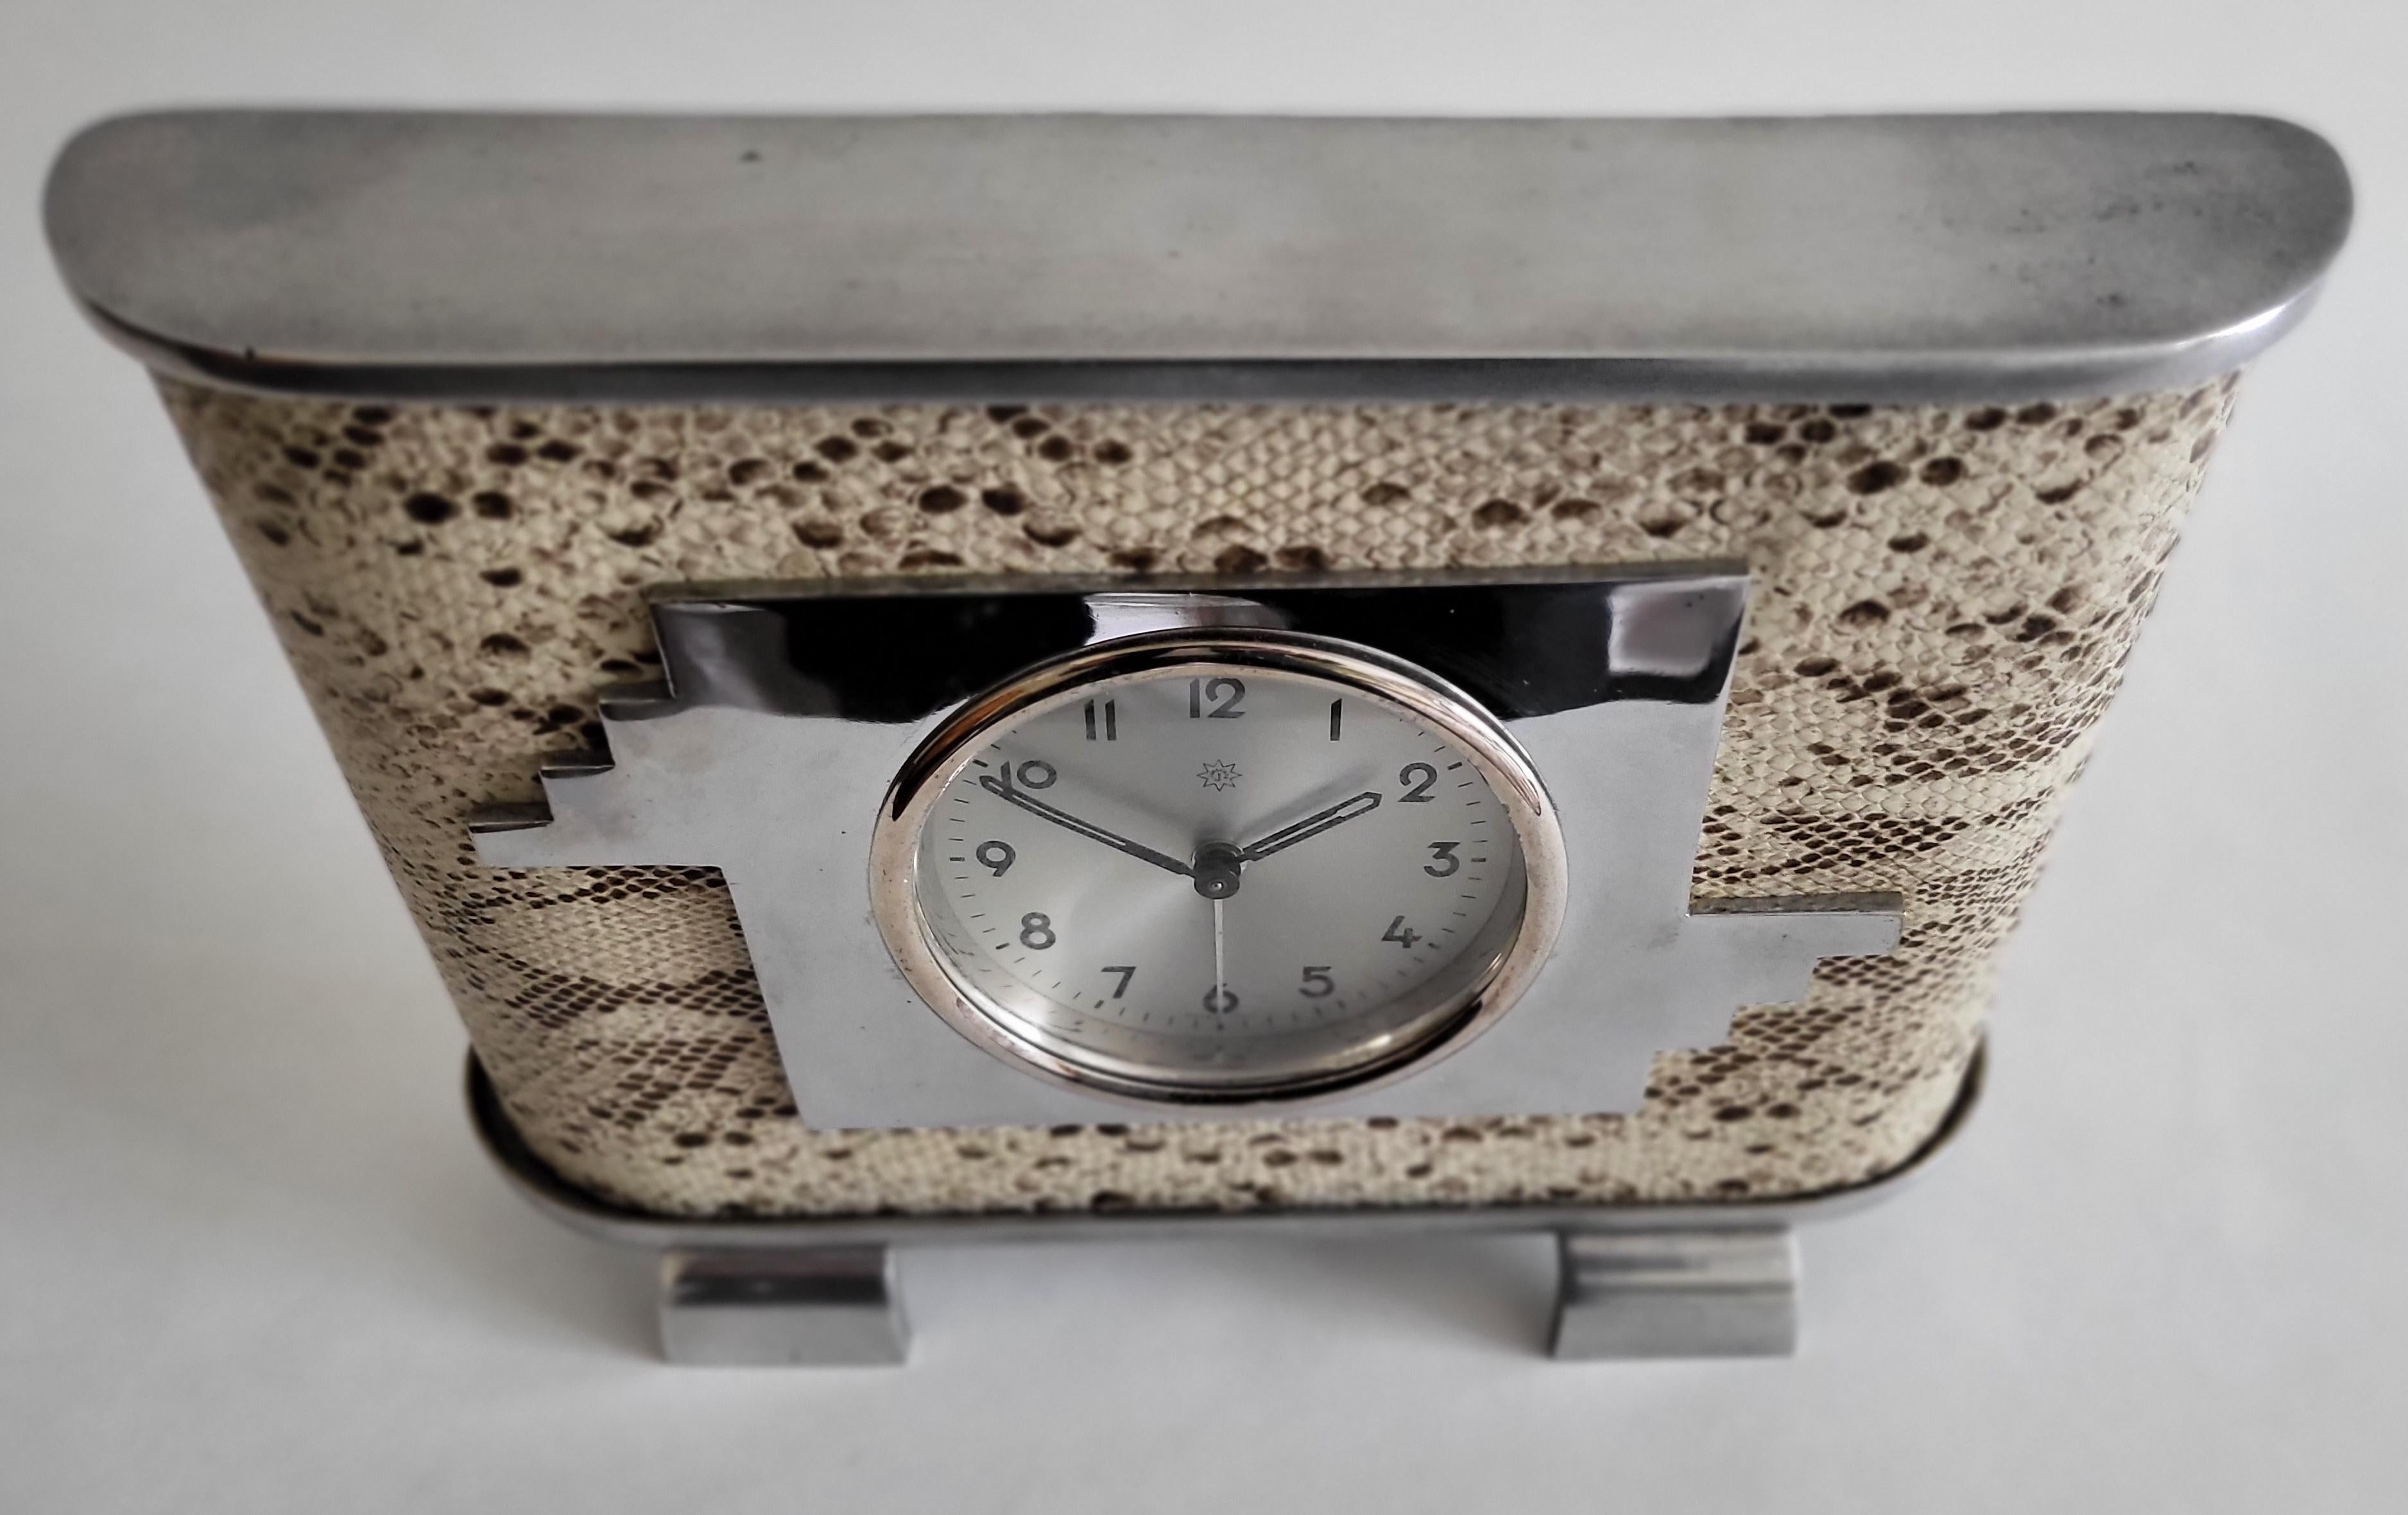 This beautifully designed and very distinctive Italian Art Deco mantel/alarm clock unusually features a Junghans German movement and bears both the Junghans logo and 